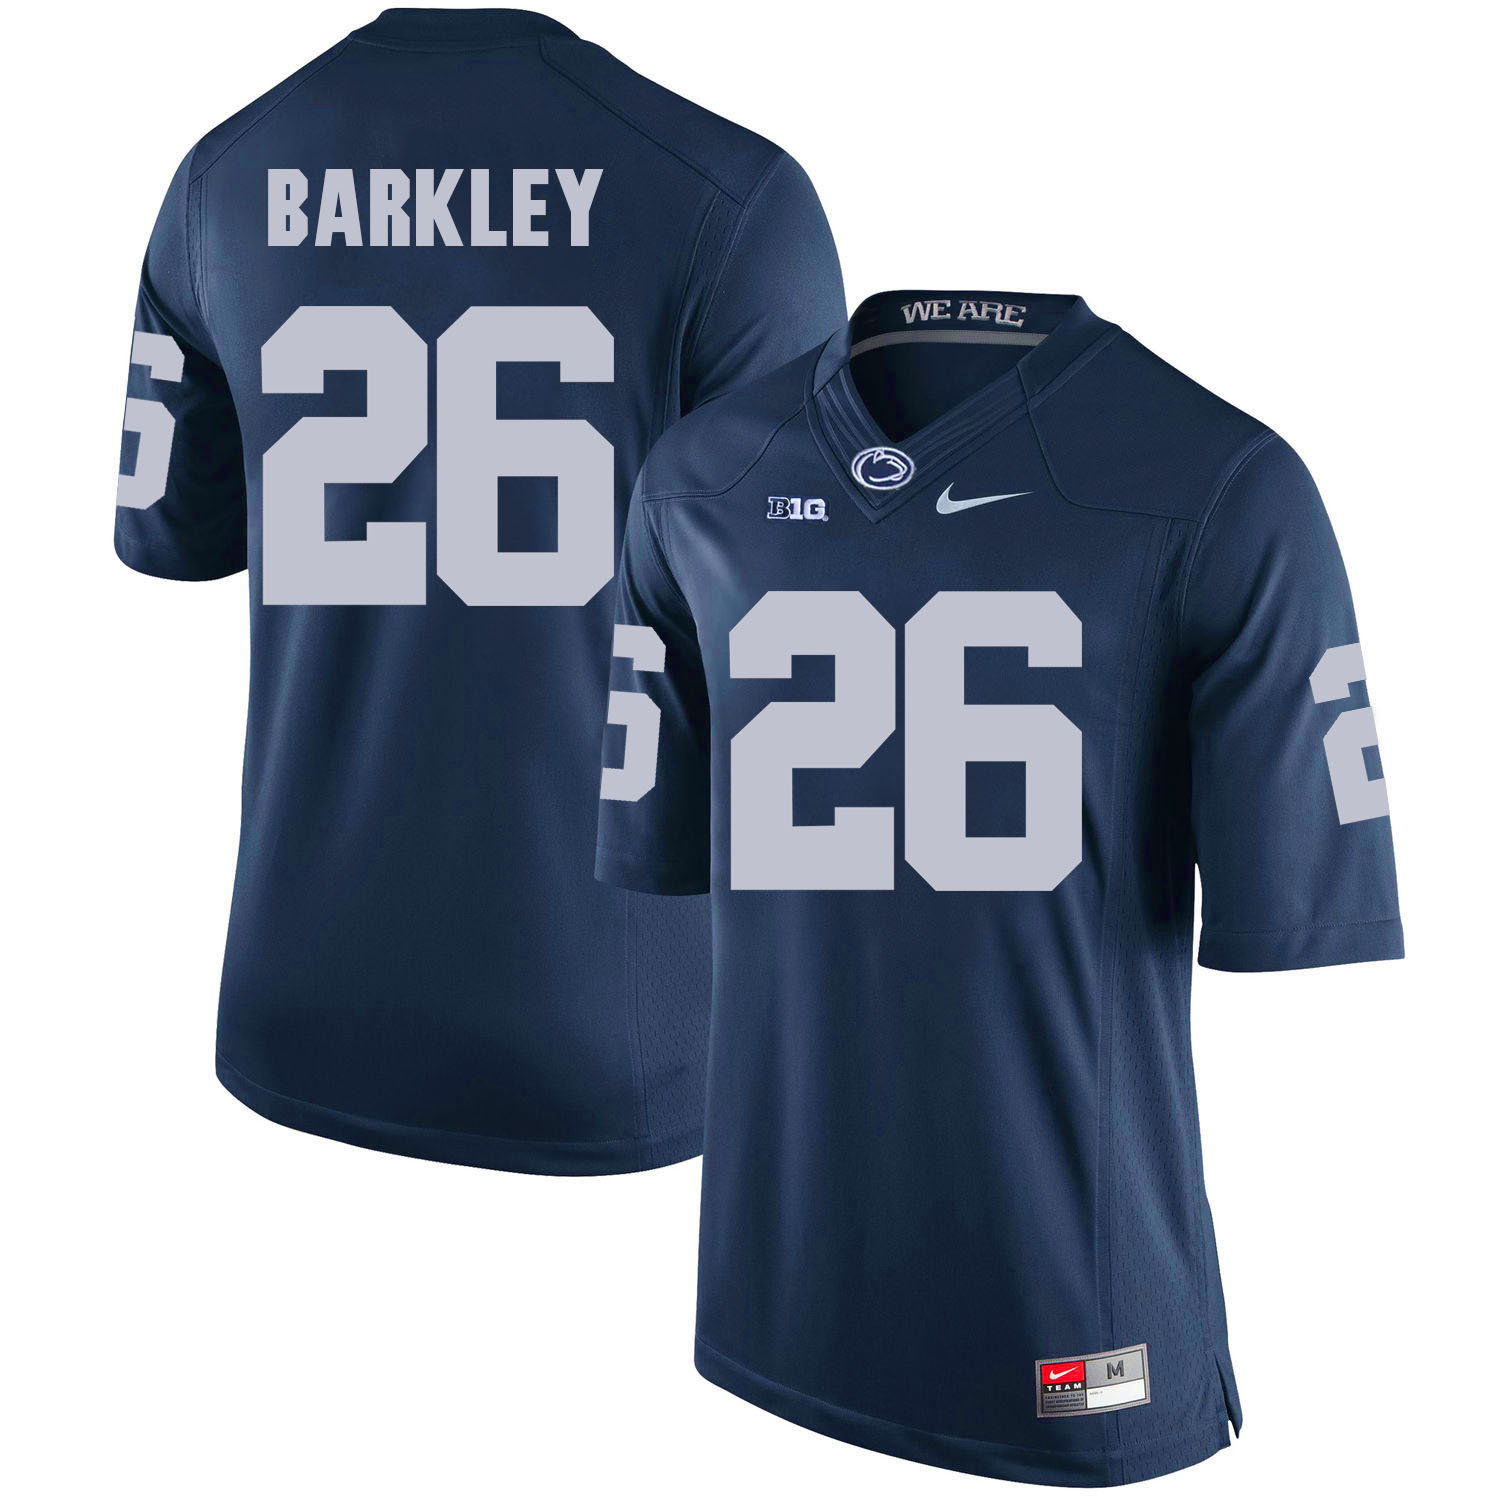 Penn State Nittany Lions 26 Saquon Barkley Navy College Football Jersey